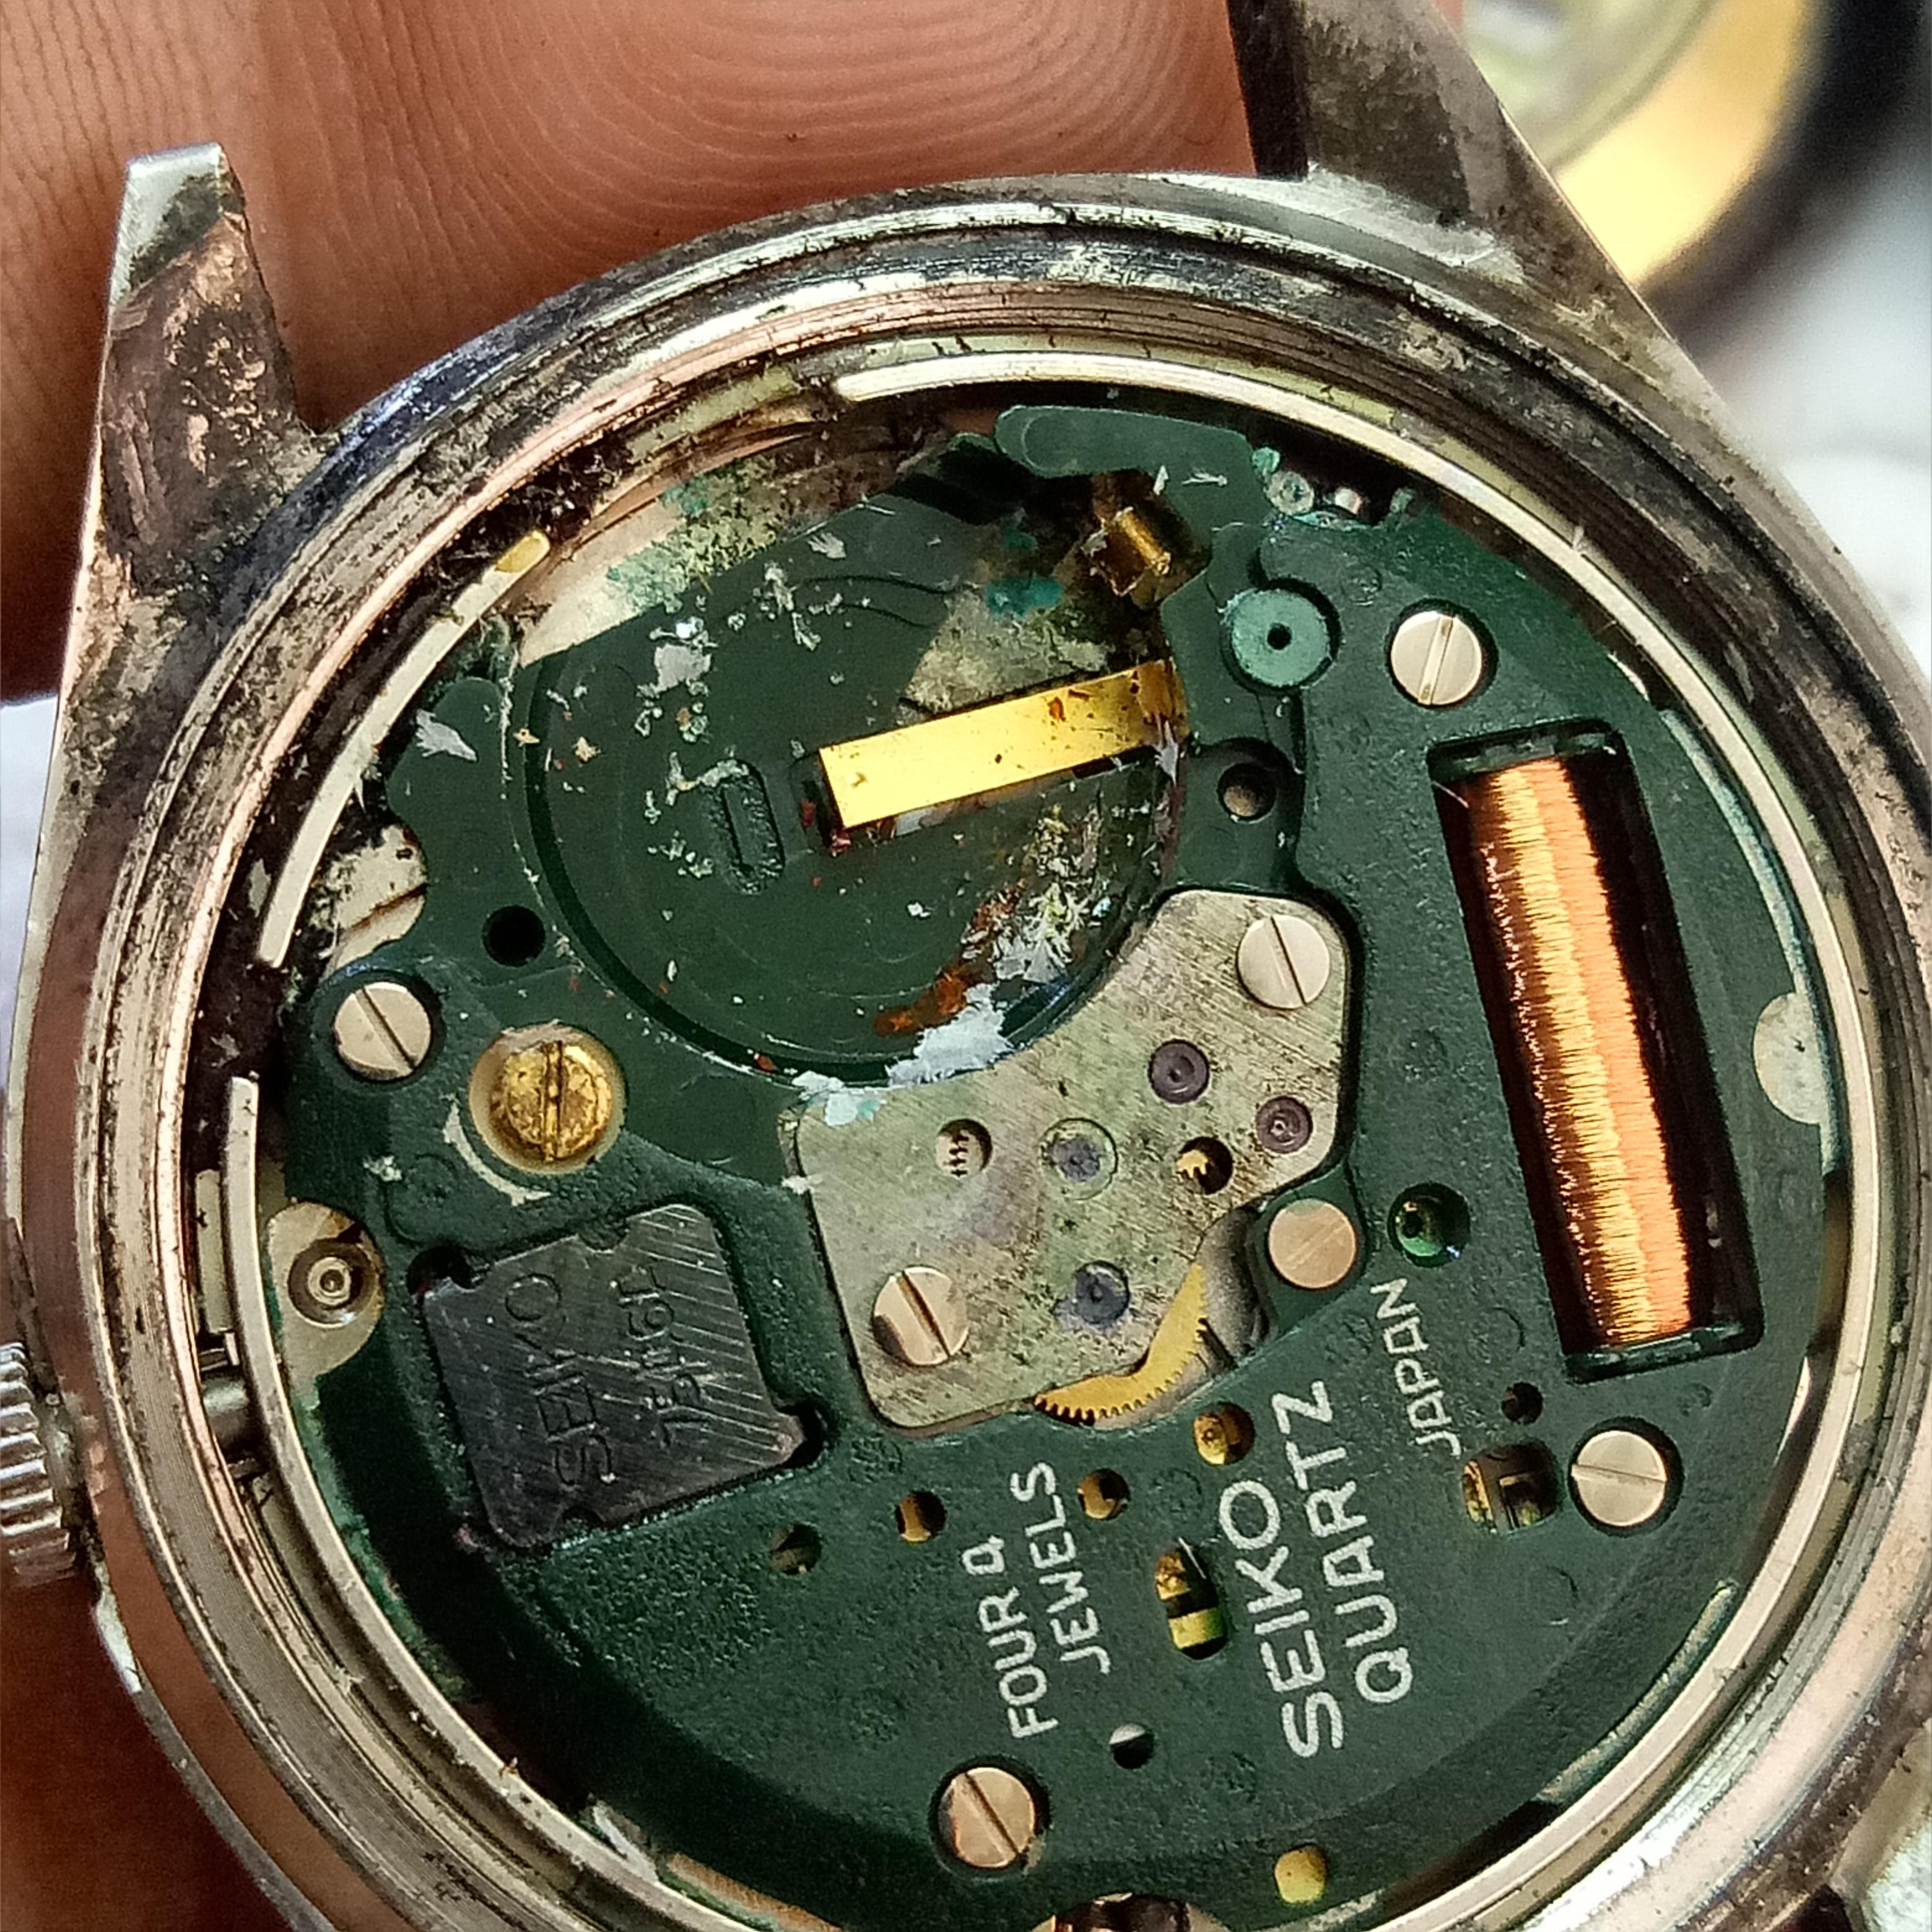 Seiko 7548. . rescue - Your Walkthroughs and Techniques - Watch Repair Talk